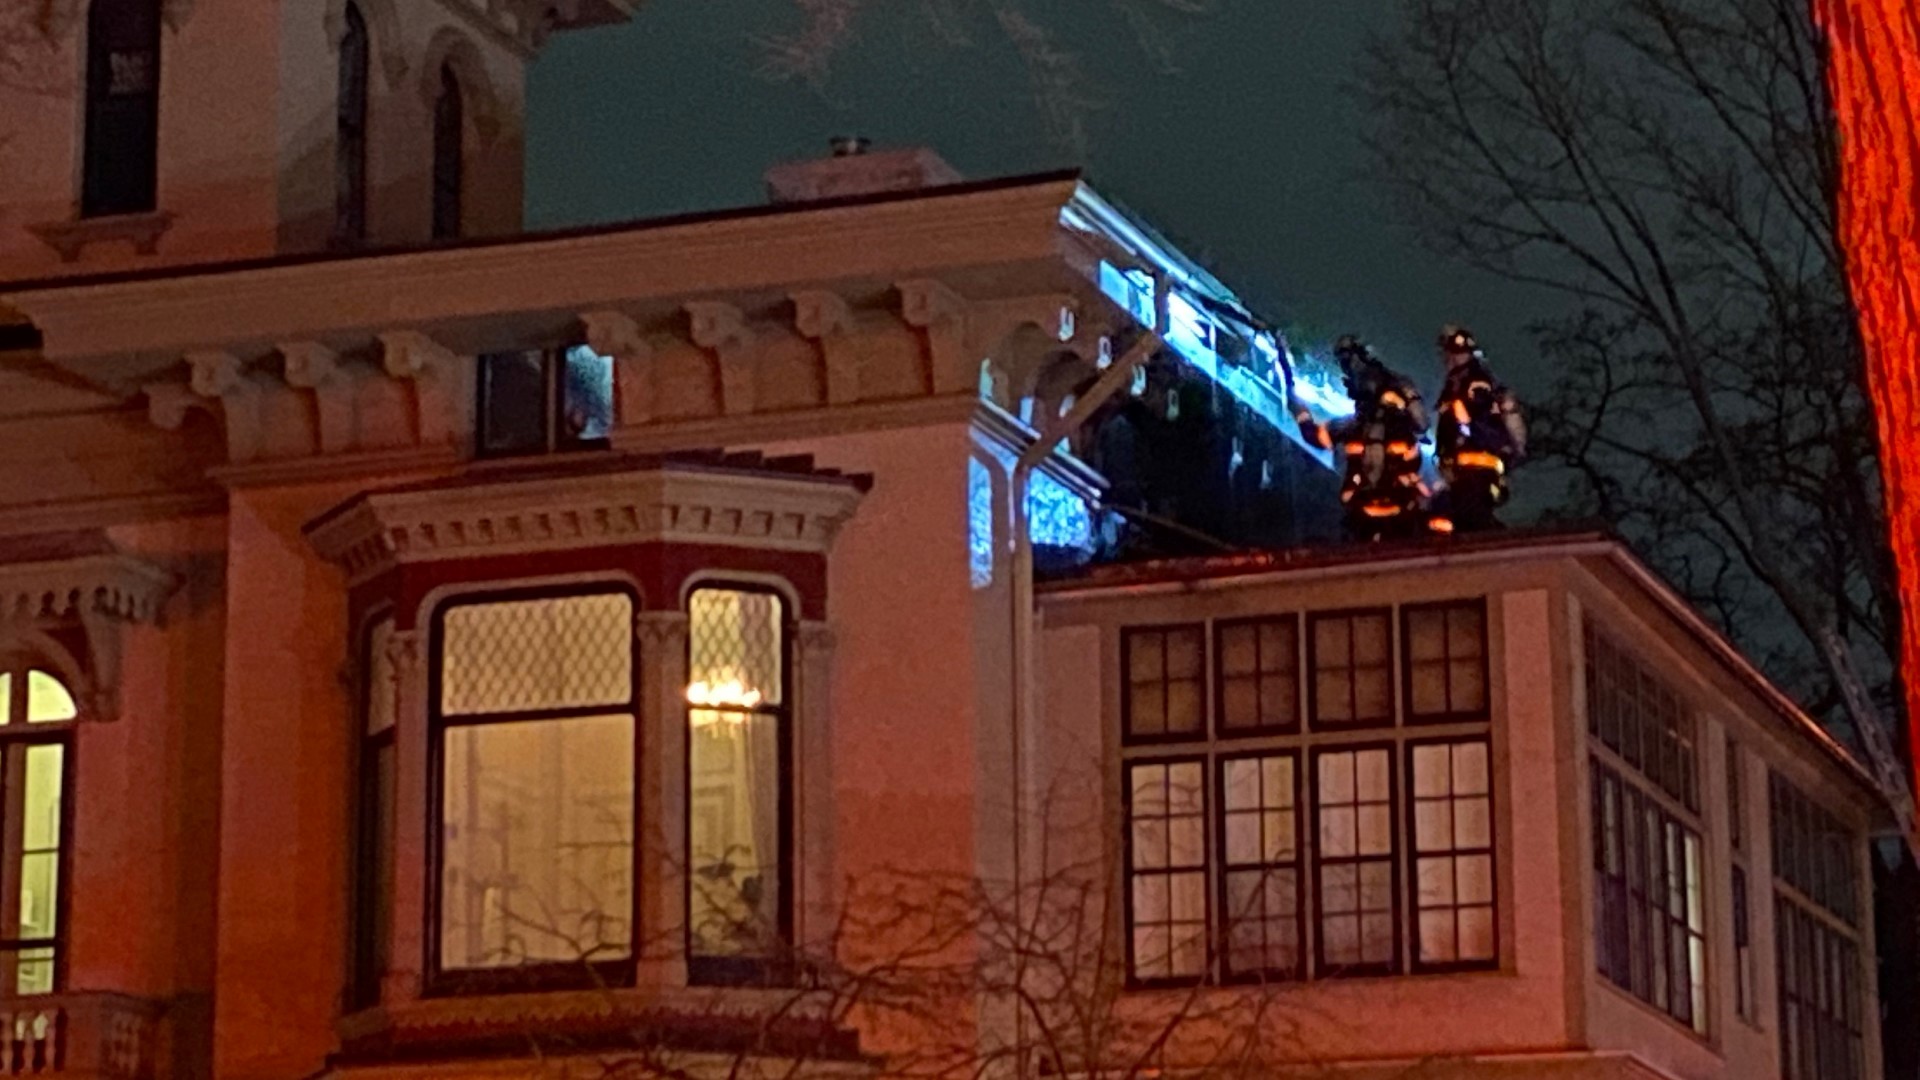 A historic Heritage Hill manor converted into apartments caught fire Thursday evening.